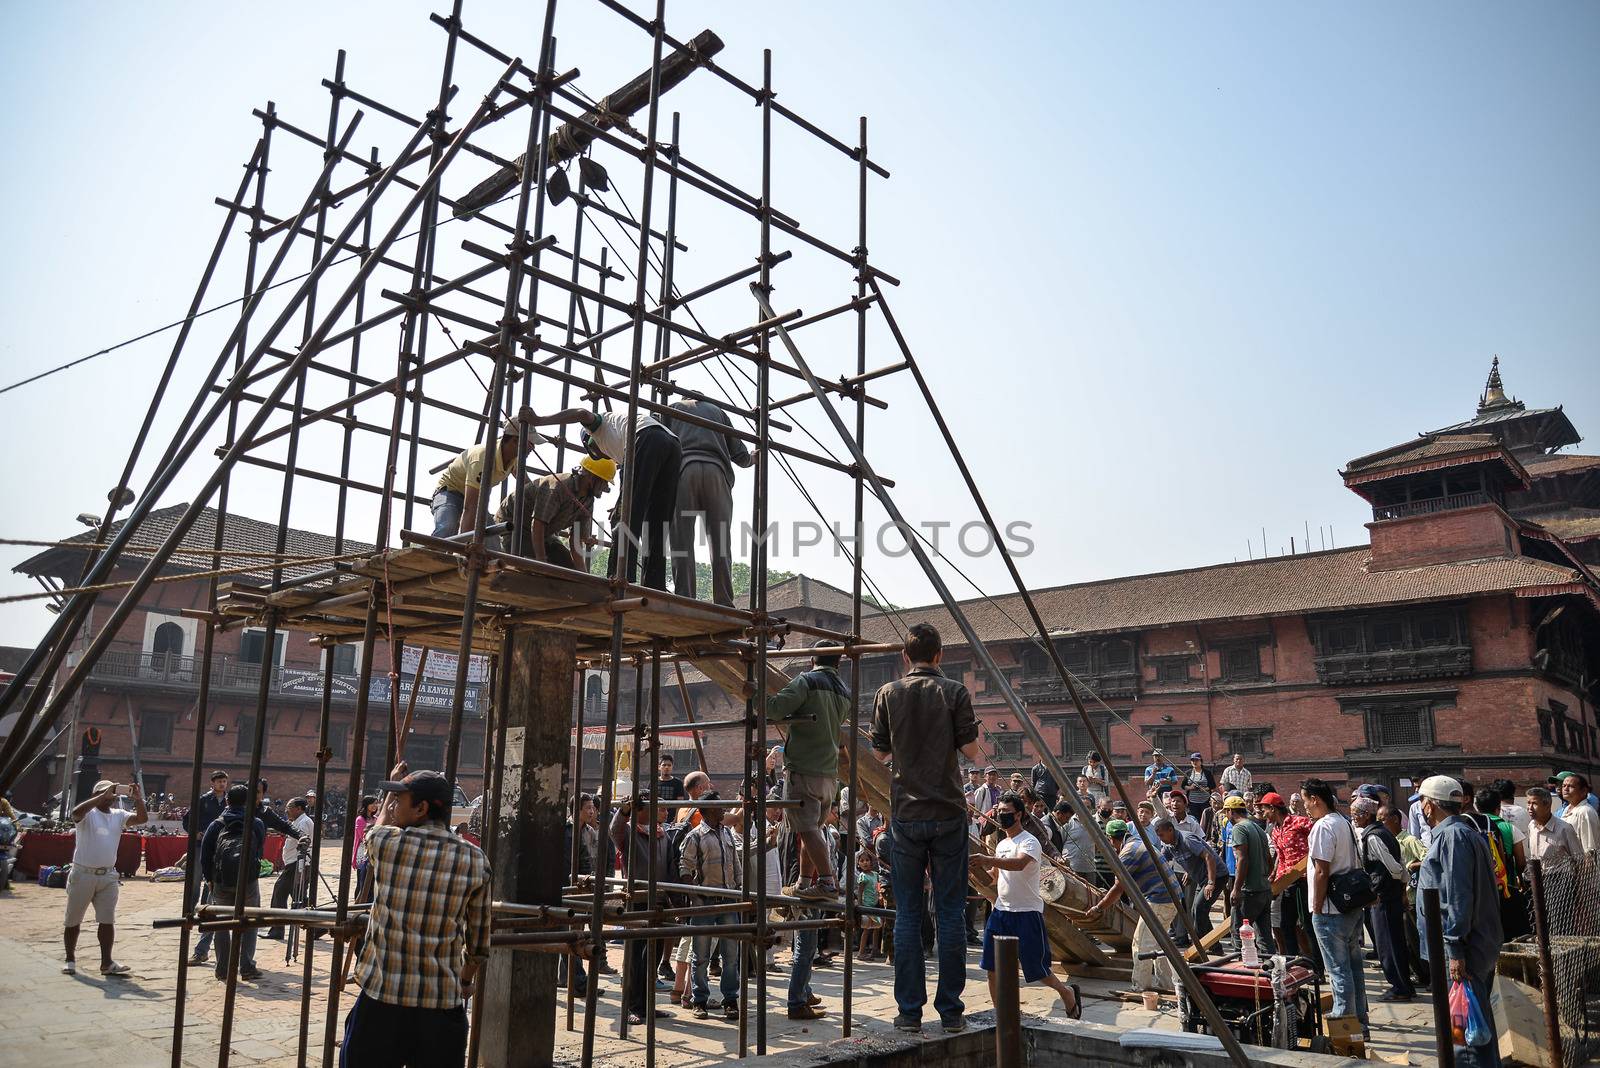 NEPAL, Kathmandu: Men begin rebuilding heritage sites damaged by the earthquake a year ago, on April 25, 2016, at Patan Durbar Square in Kathmandu, in Nepal, during the first anniversary of the quake.Some 9,000 people were killed in the 7.8-magnitude quake that struck April 25, 2015 and its aftershocks. . 